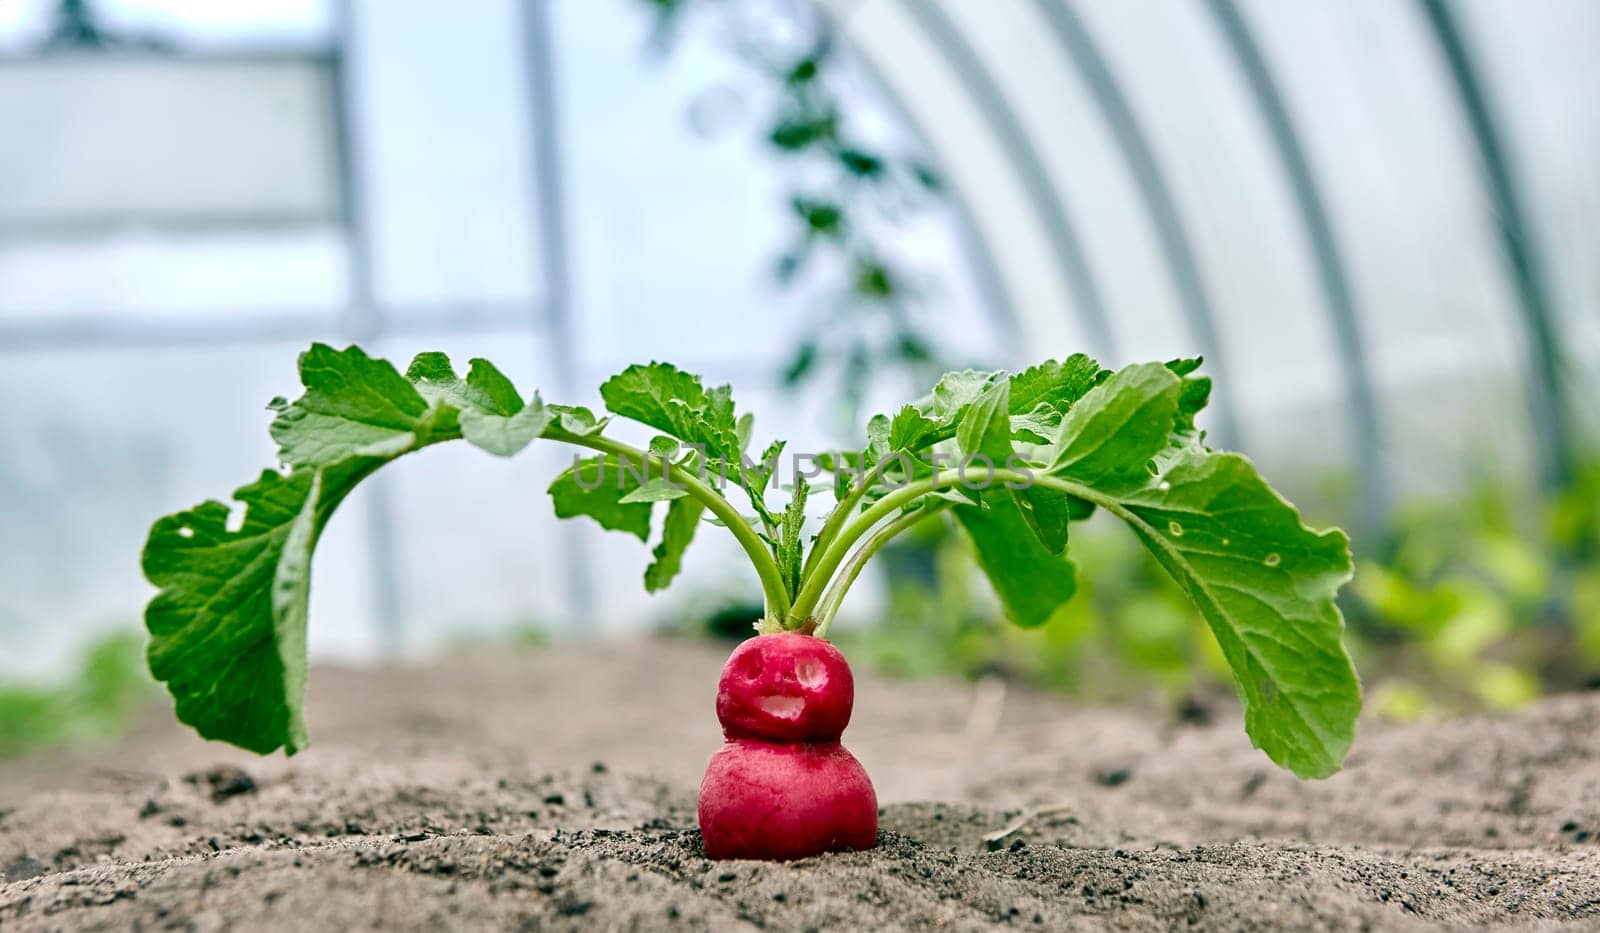 Close-up of a single red radish growing in the soil of a greenhouse.